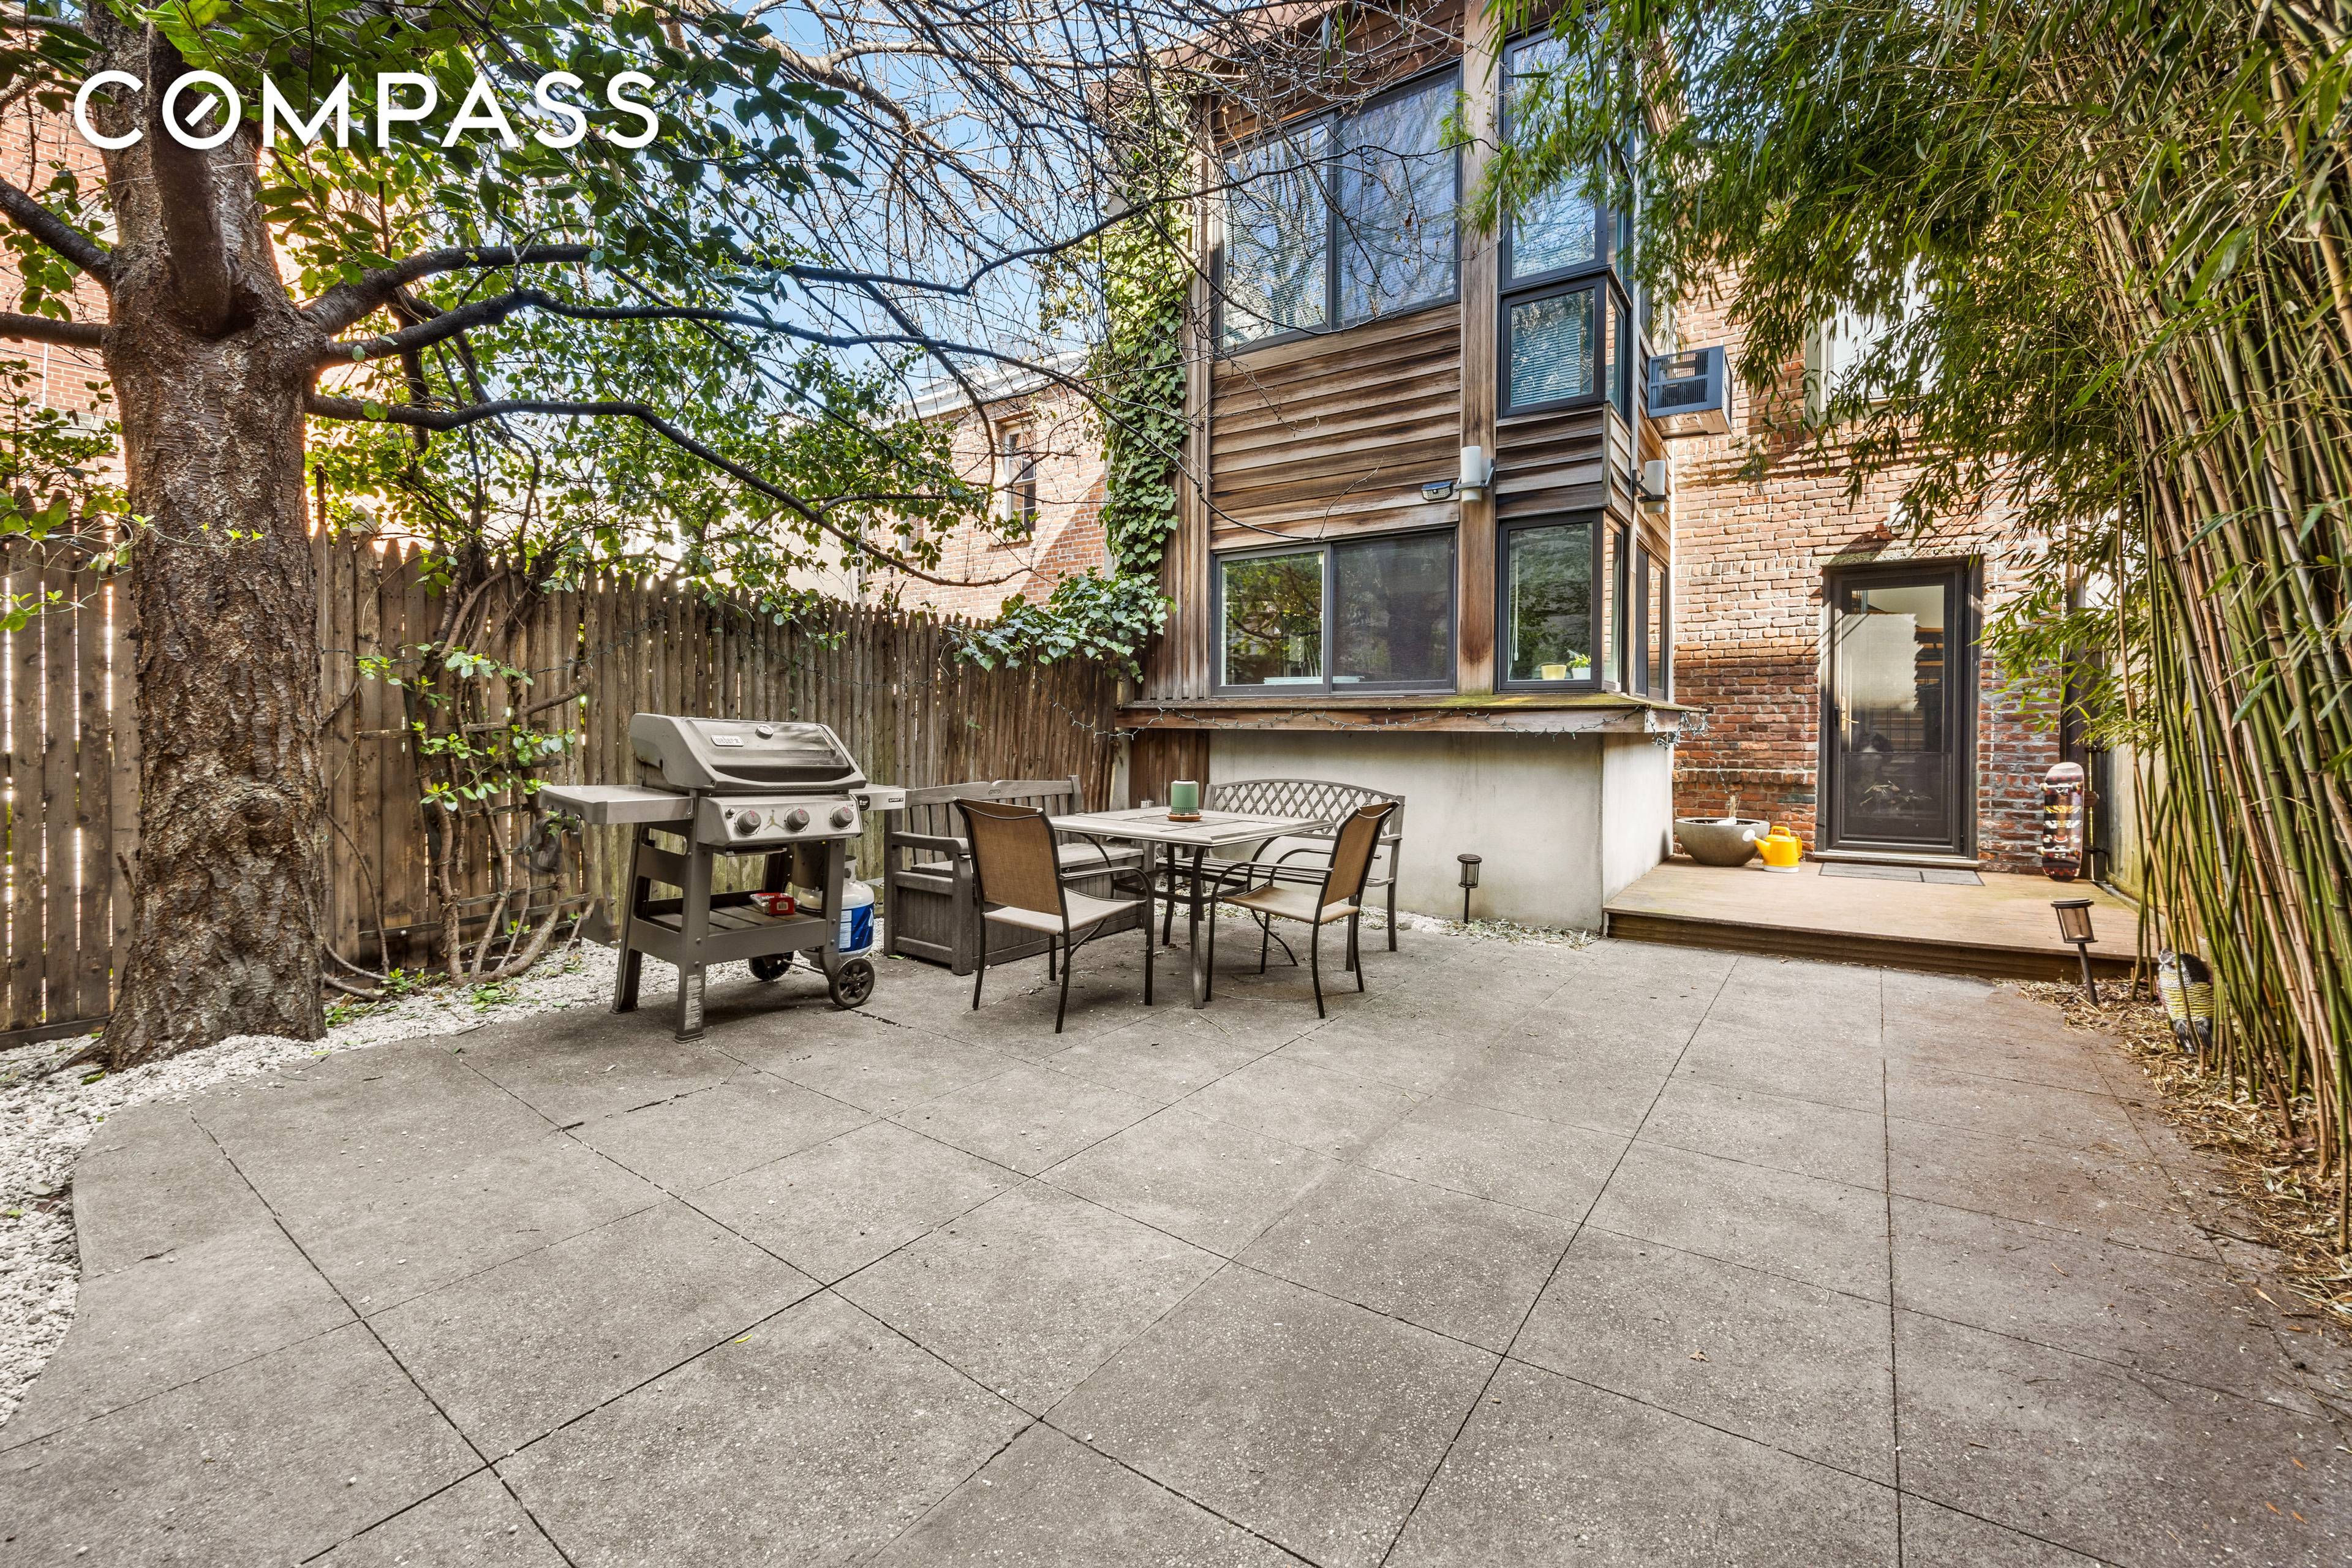 This unique carriage house is in the heart of Boerum Hill on a pretty tree lined street.